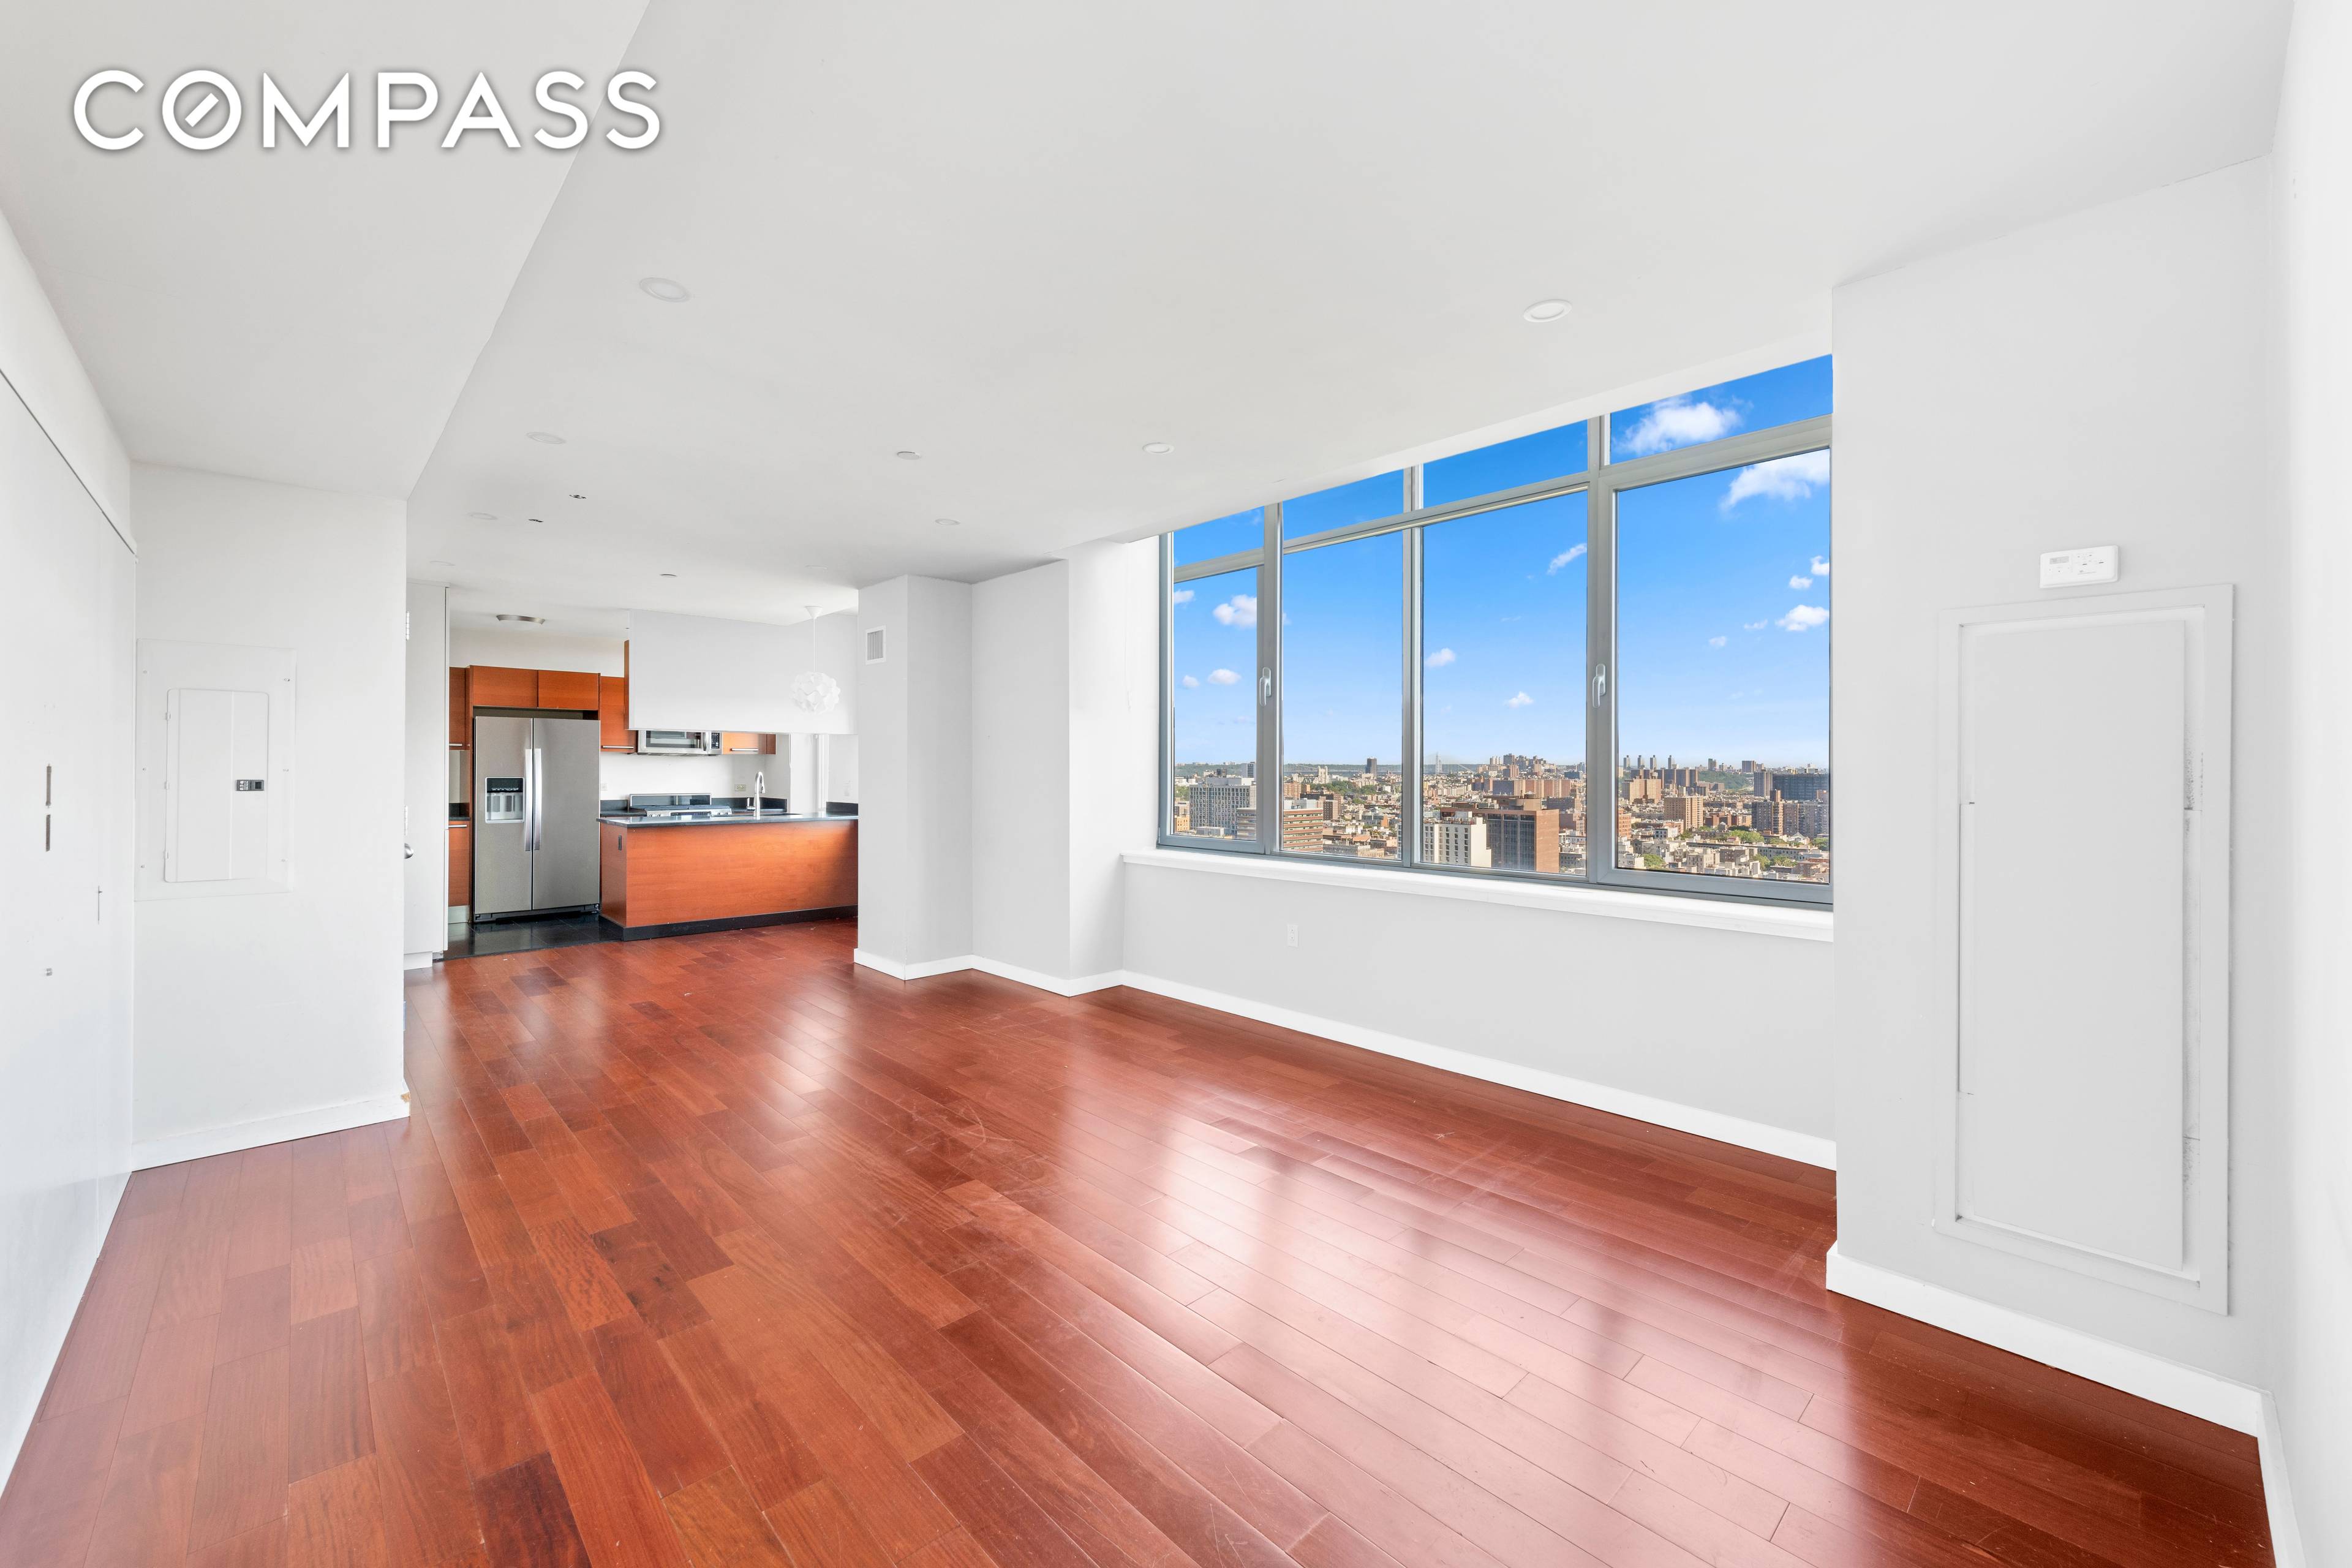 This modern and luxurious 1, 200 square foot, 2BR, 2BA condo offers a spacious home with skyline views in a prime Harlem location.